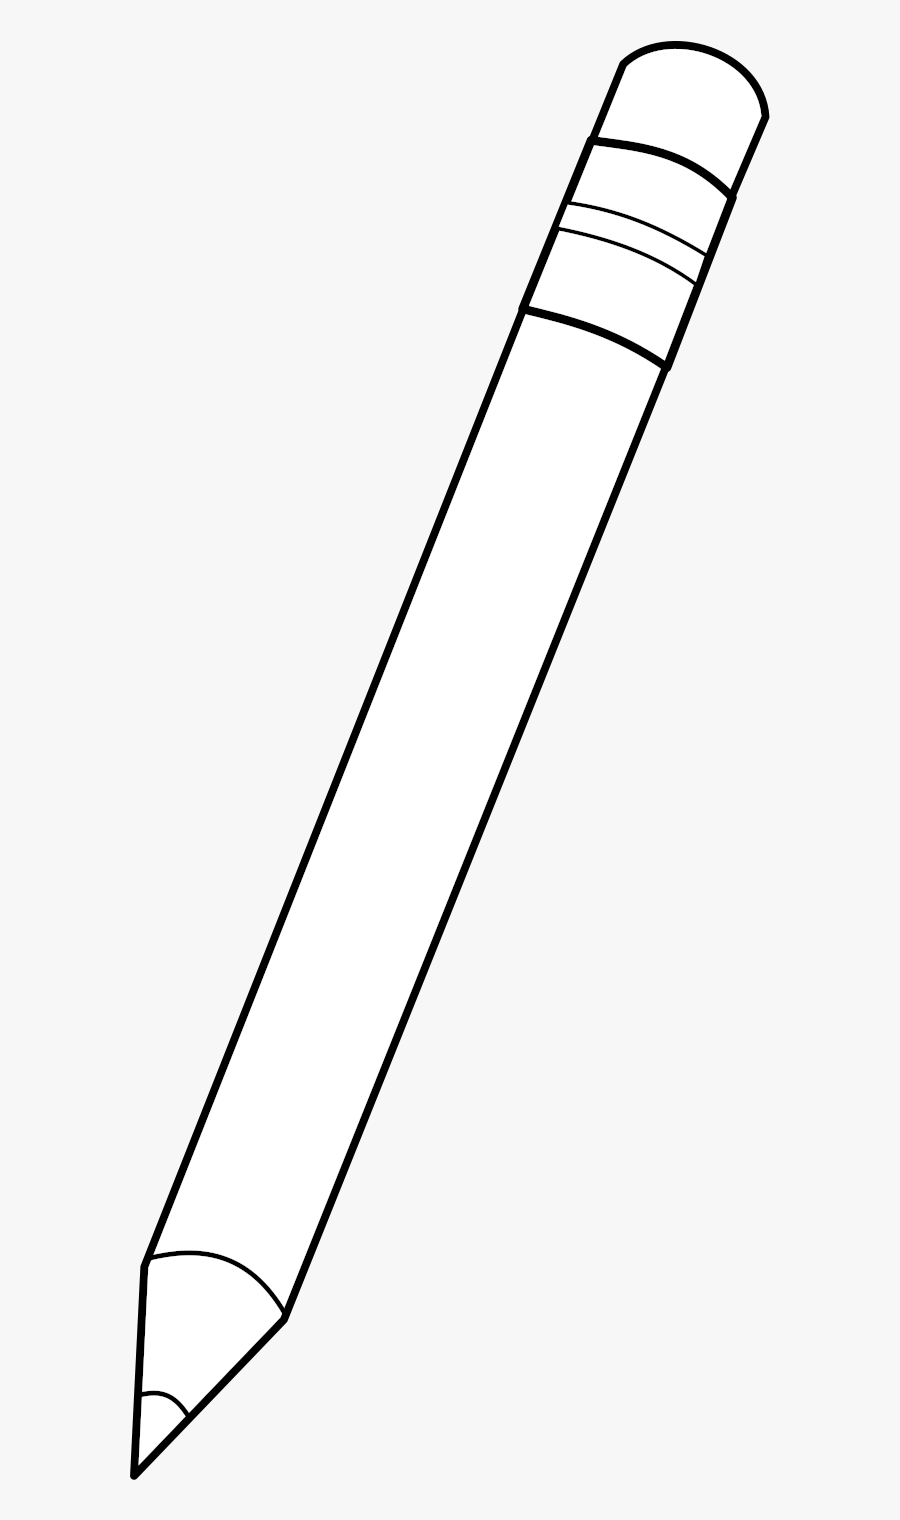 Free Images Of A Pencil, Download Free Clip Art, Free - White Pencil On Black Background, Transparent Clipart